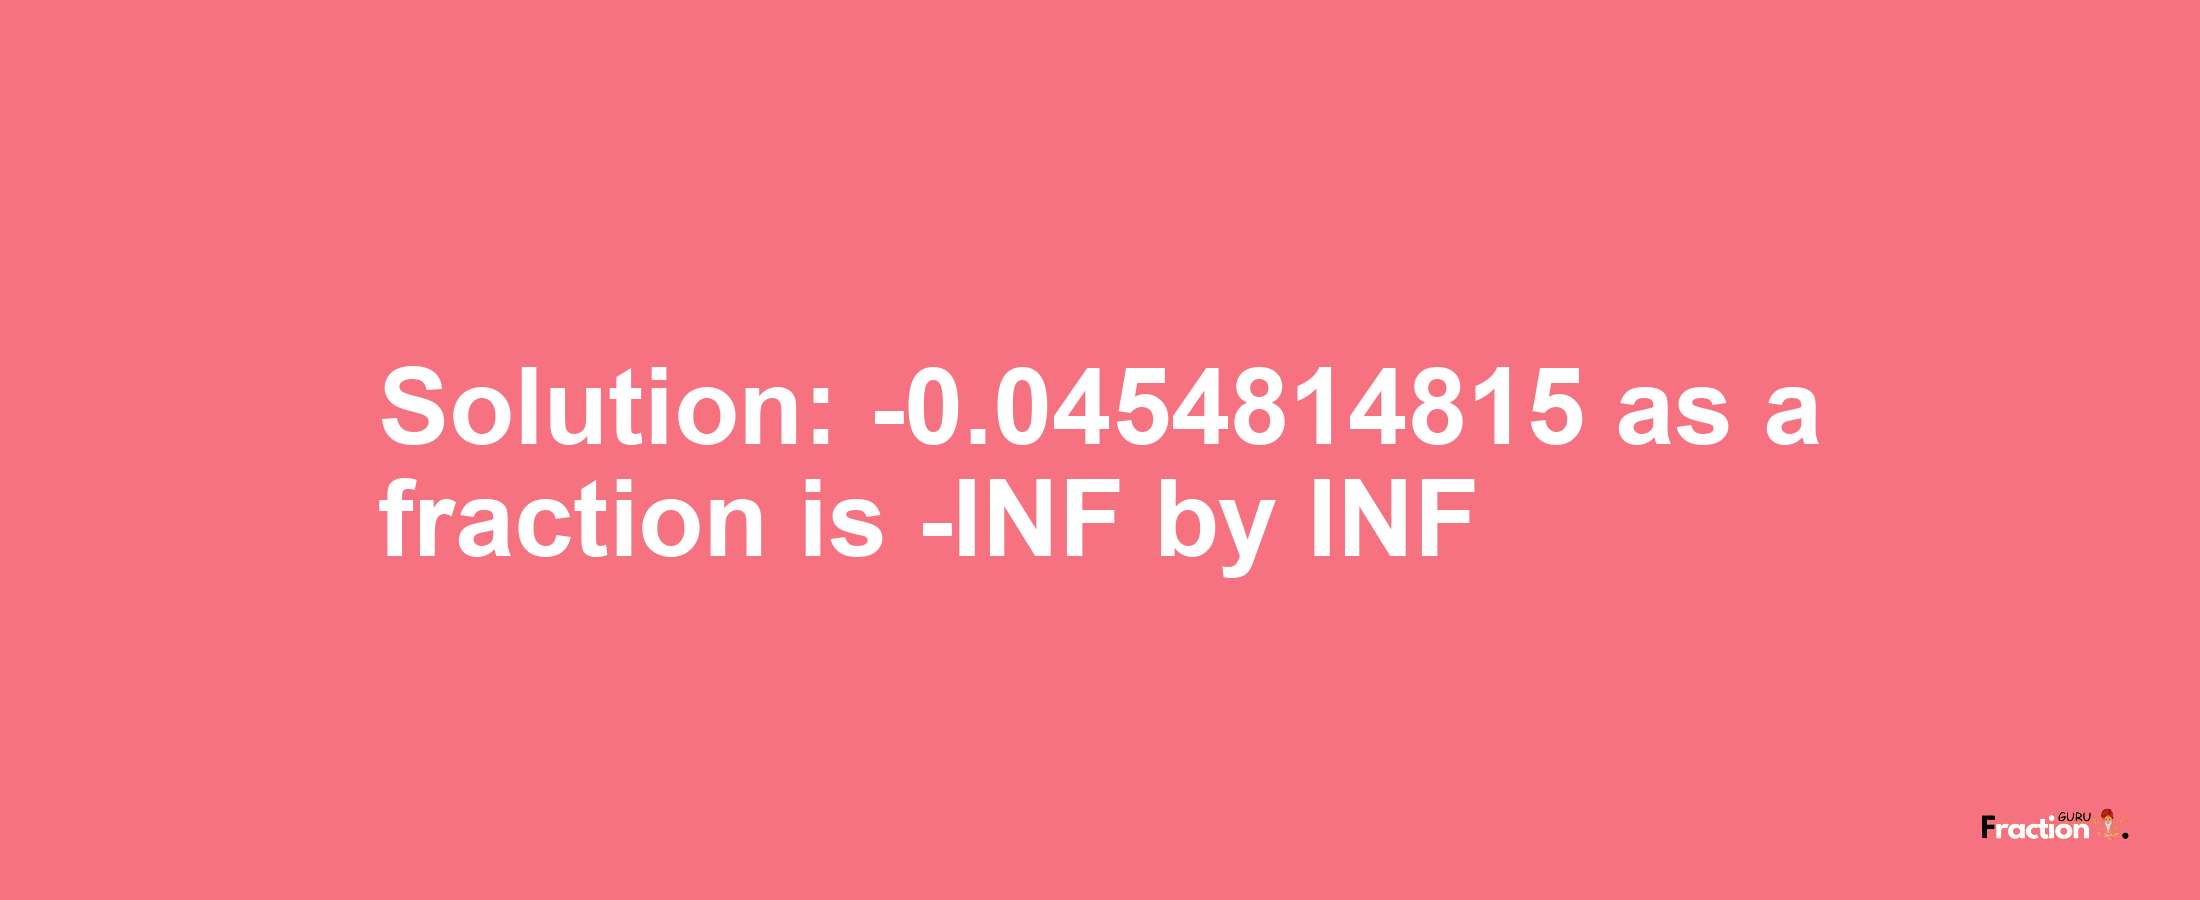 Solution:-0.0454814815 as a fraction is -INF/INF